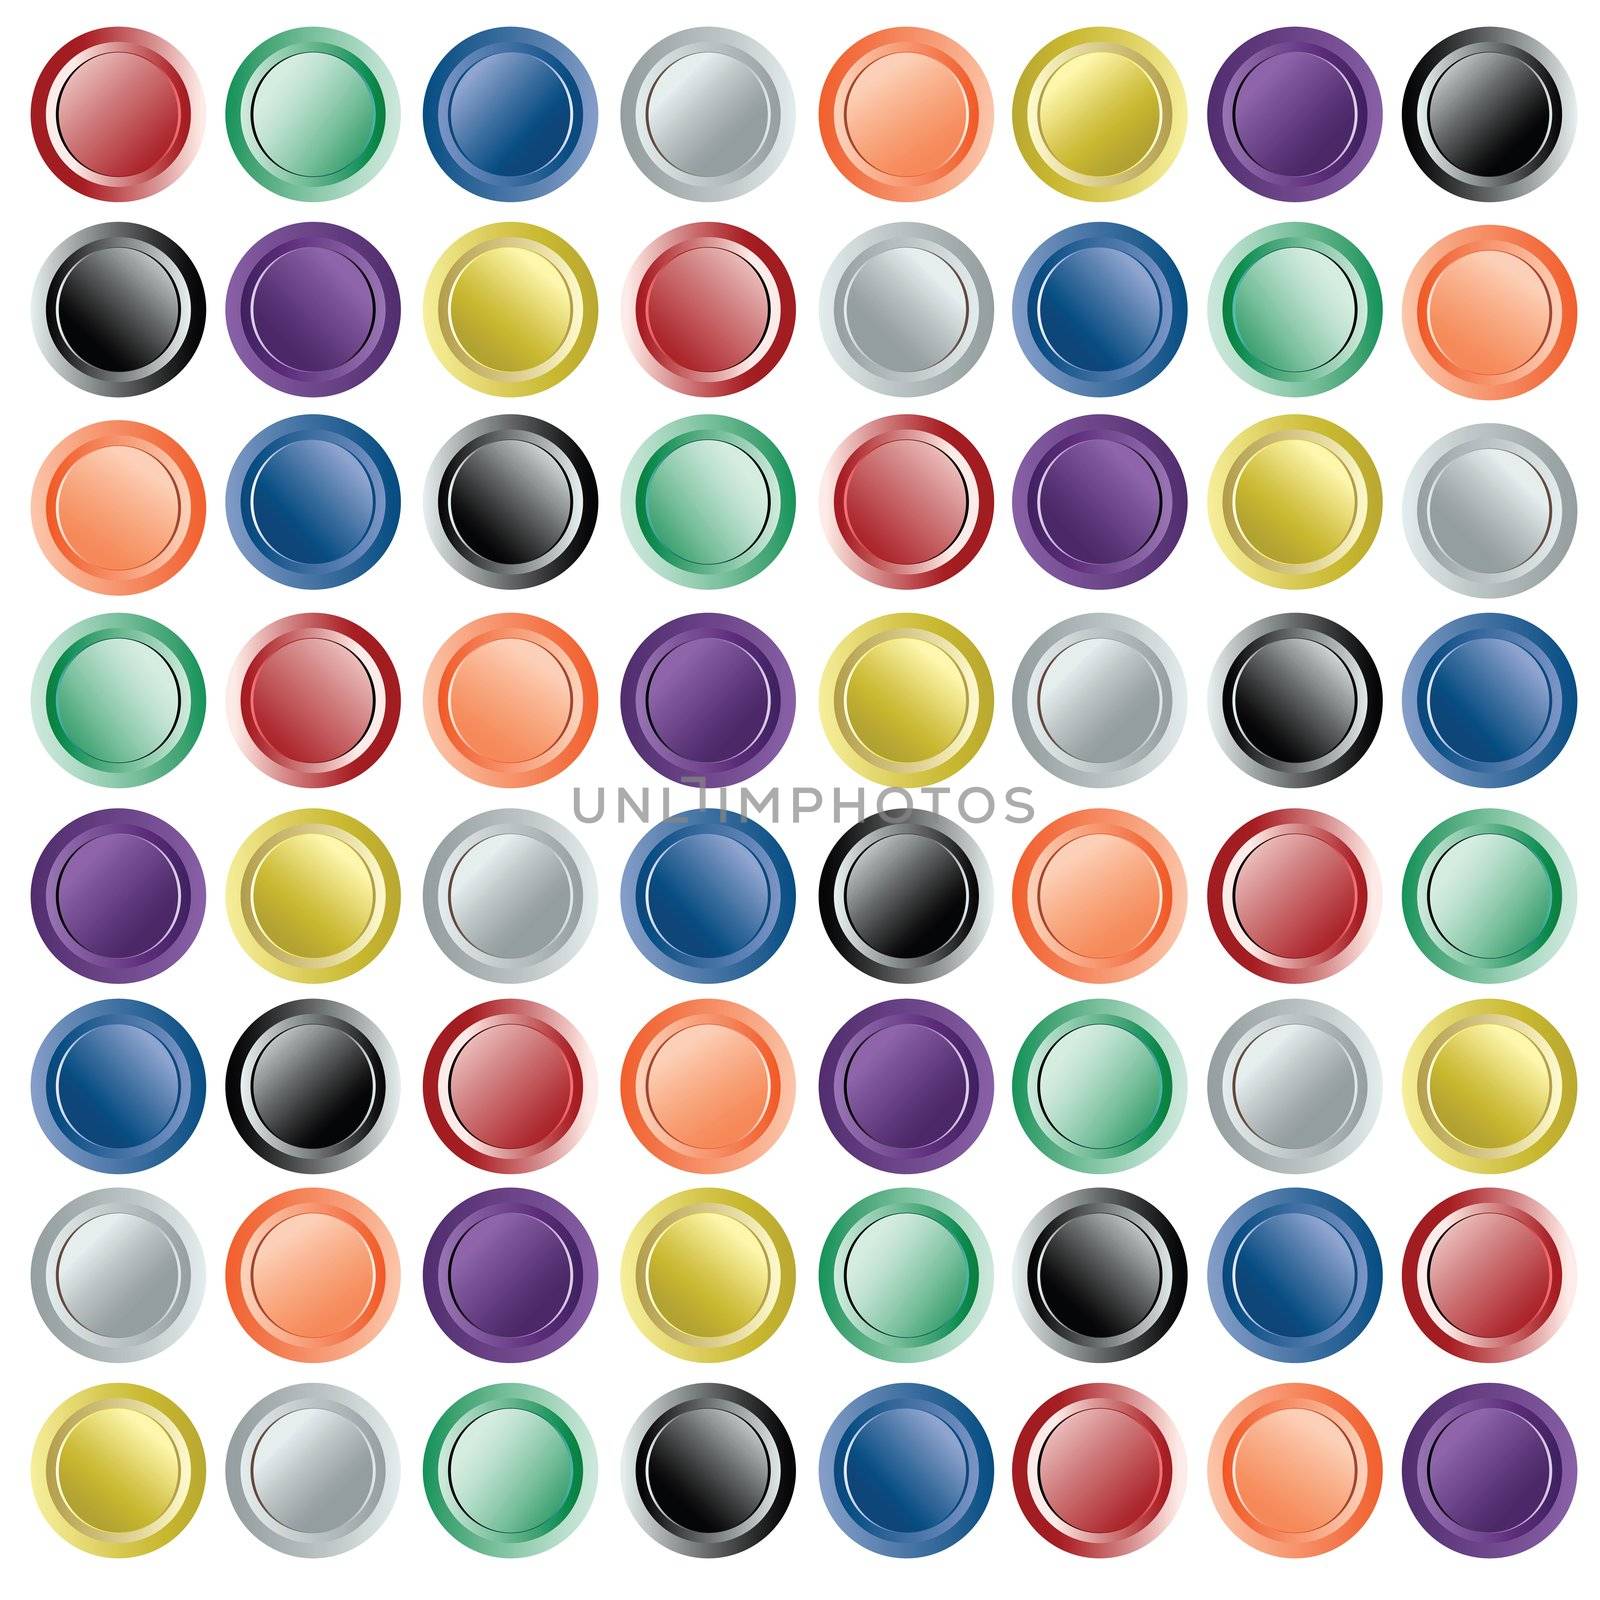 web buttons on paper, vector art illustration; more web buttons in my gallery